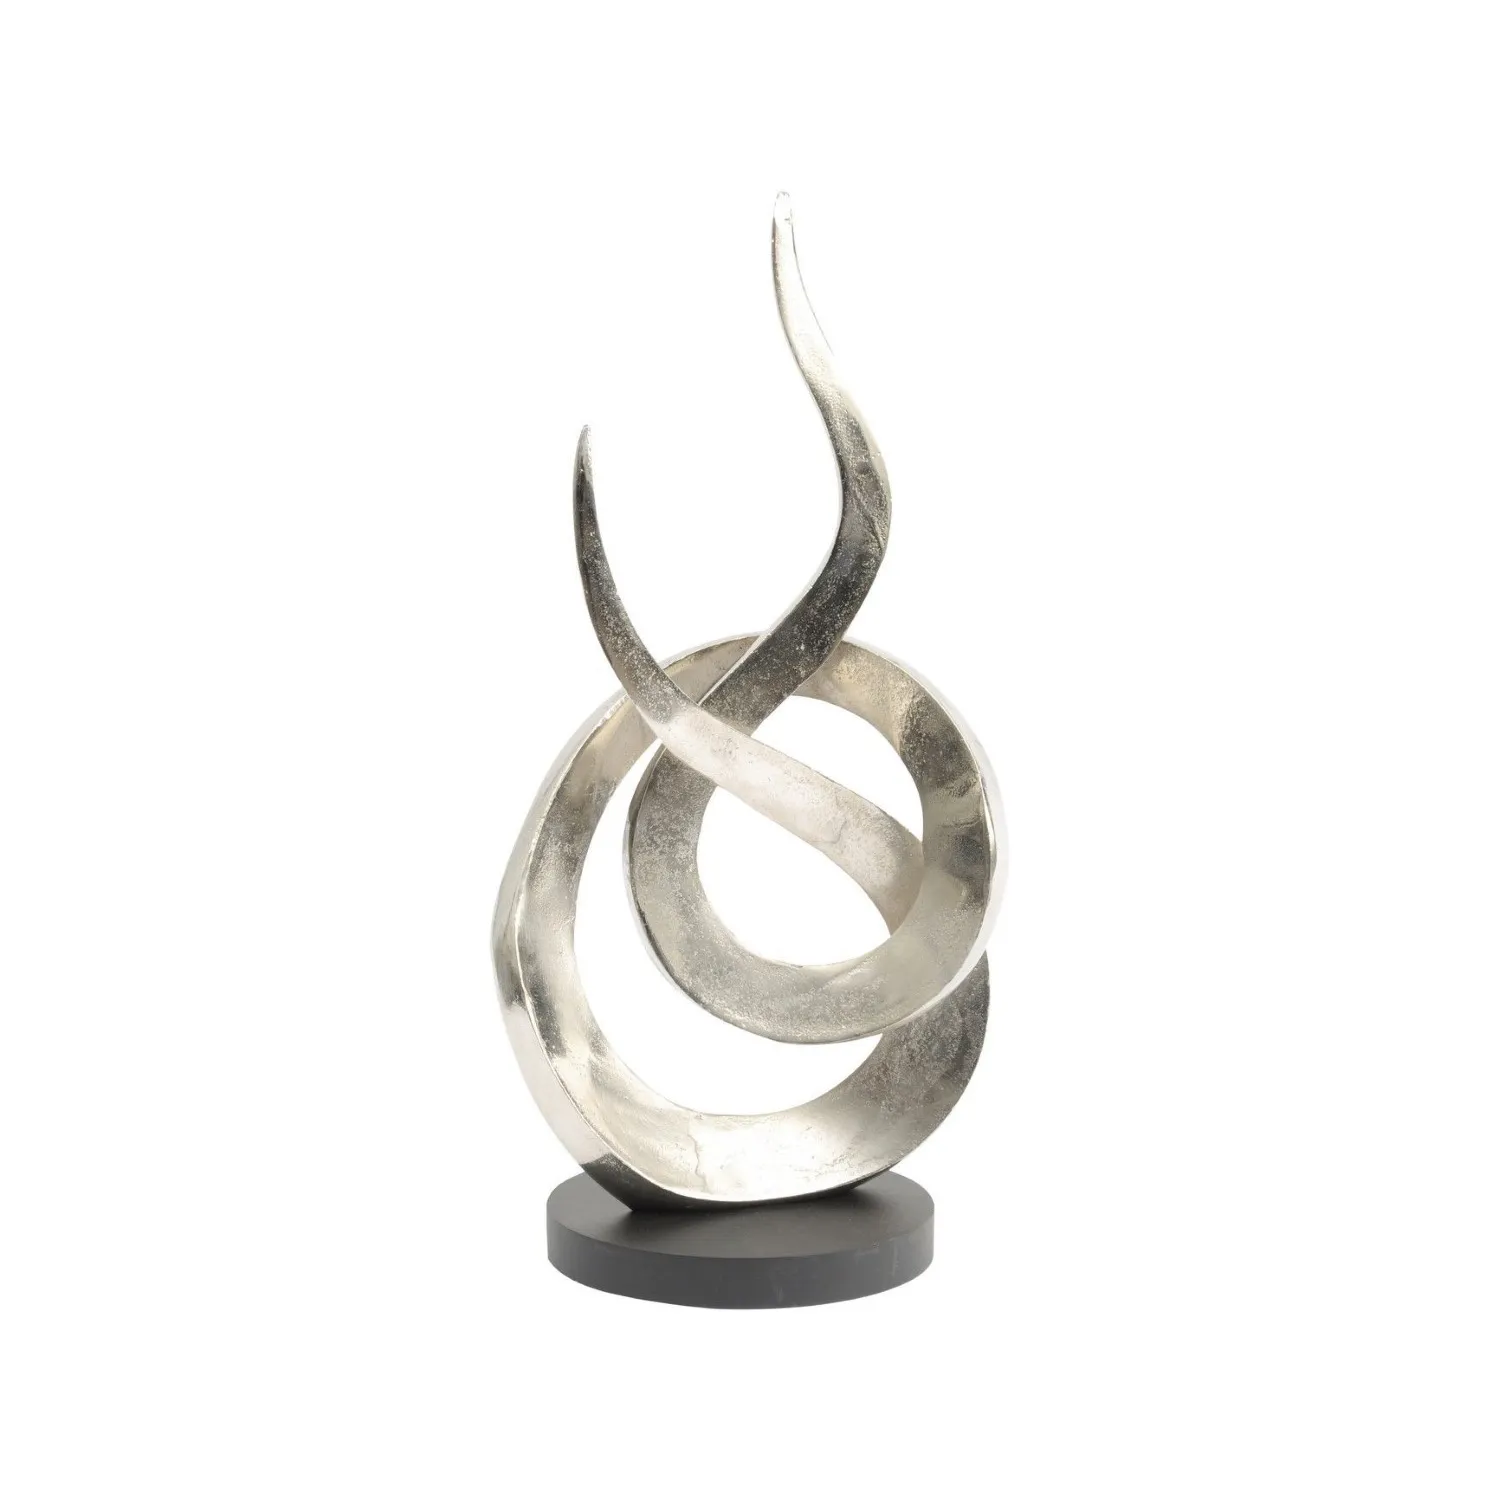 Large Silver Metal Entwined Flame Sculpture